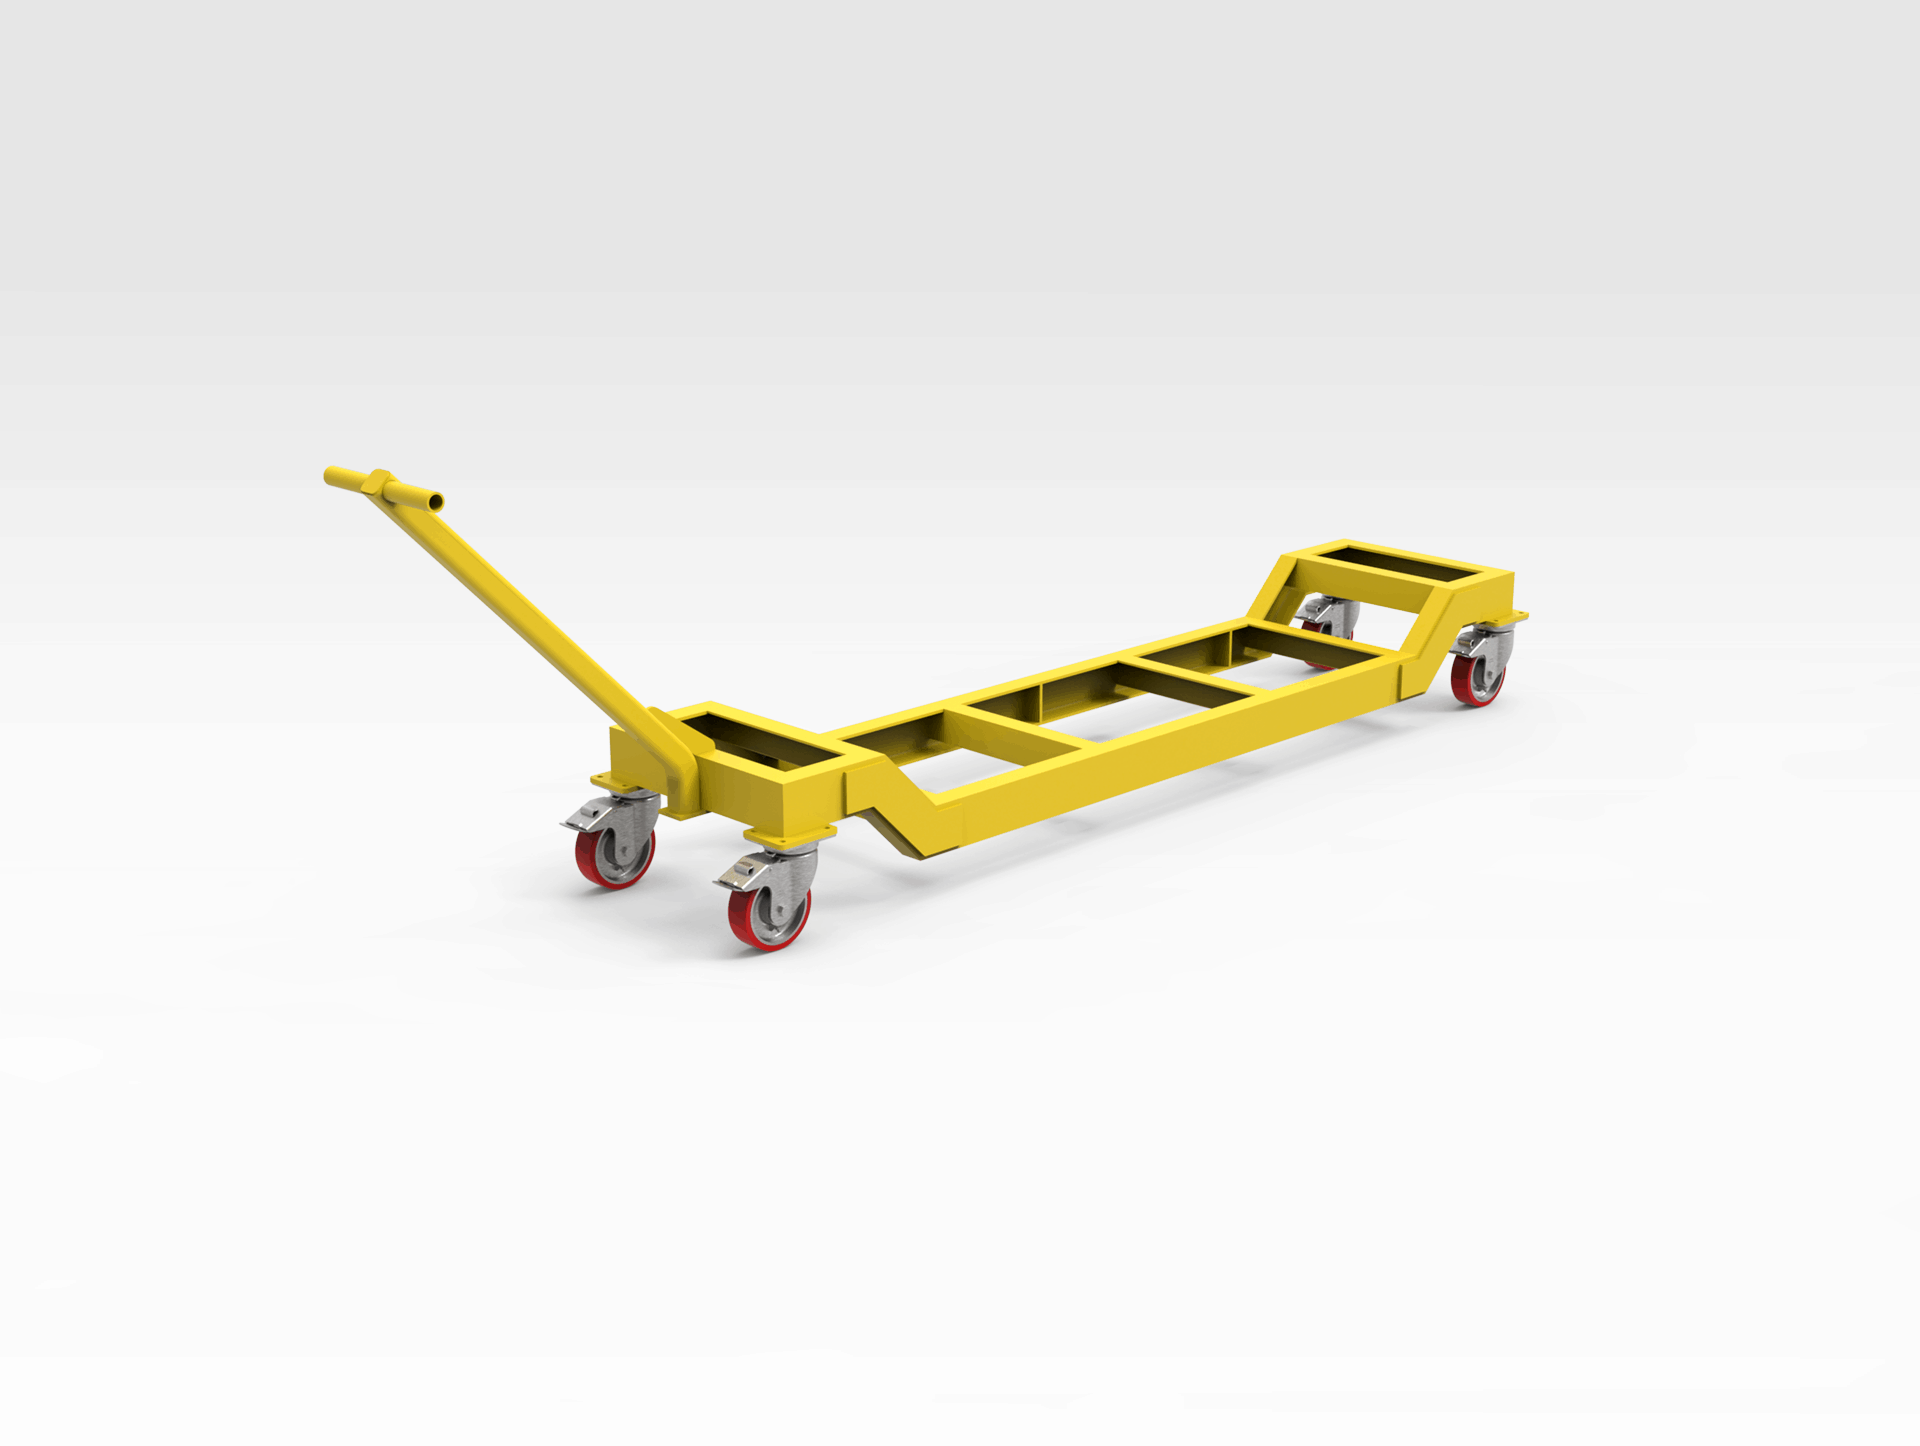 Pulley Trolley - get the best rating filter average rating value 5 - hand trucks, active filters stainless steel trolleys, platform trolleys, hand trolleys, folding trolley, industrial trolley, stainless steel construction, heavy loads warehouse trolleys, pneumatic wheels trolleys hand trucks, locale active filters